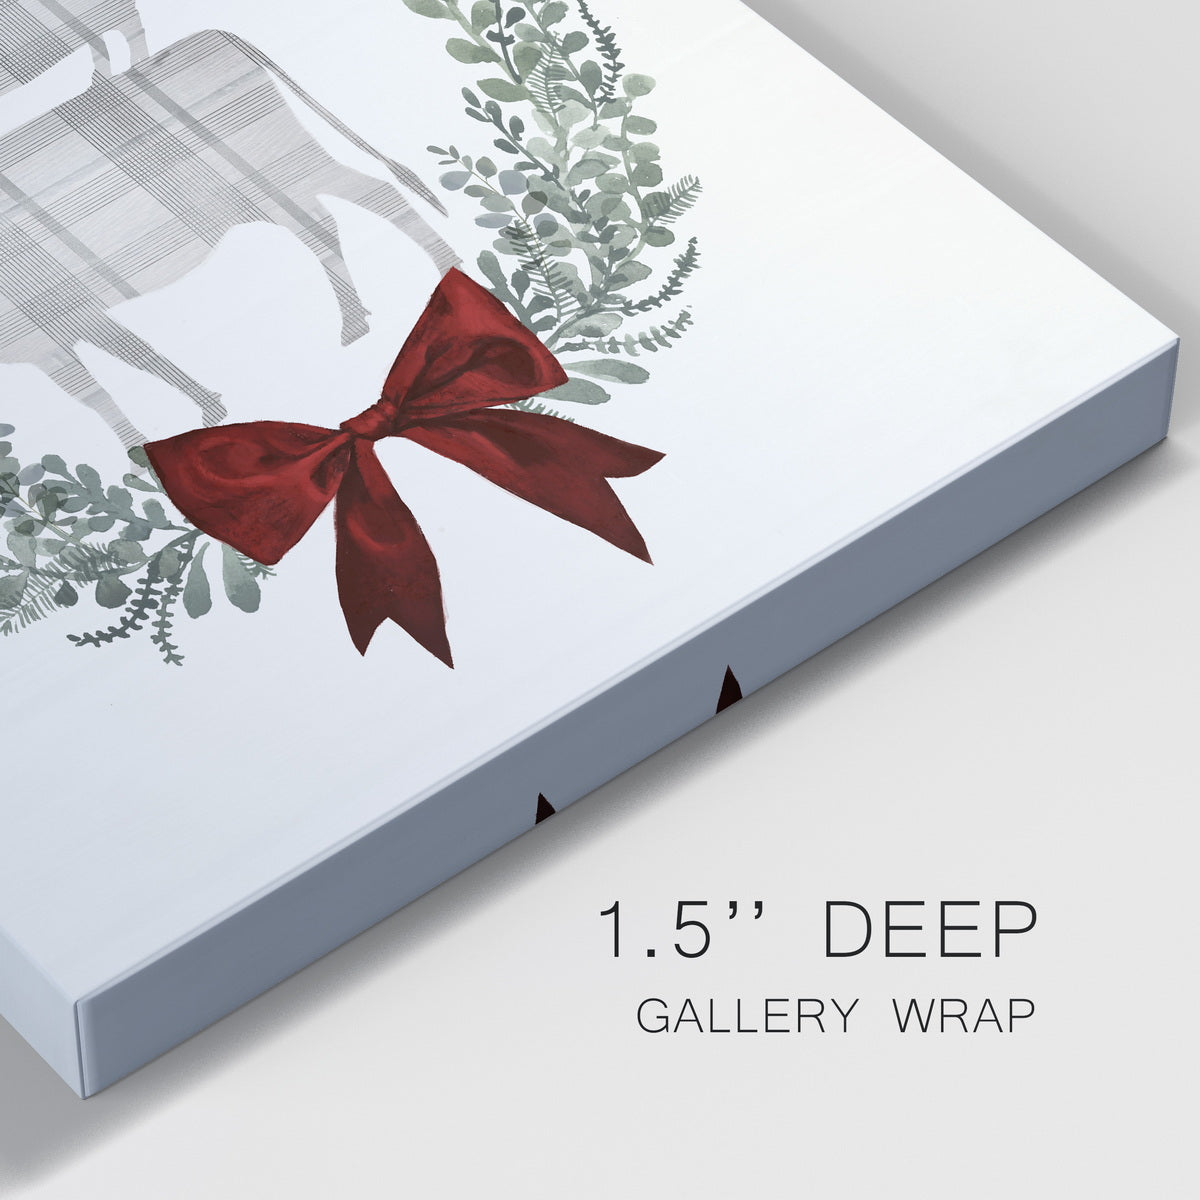 Yuletide Animals II Premium Gallery Wrapped Canvas - Ready to Hang